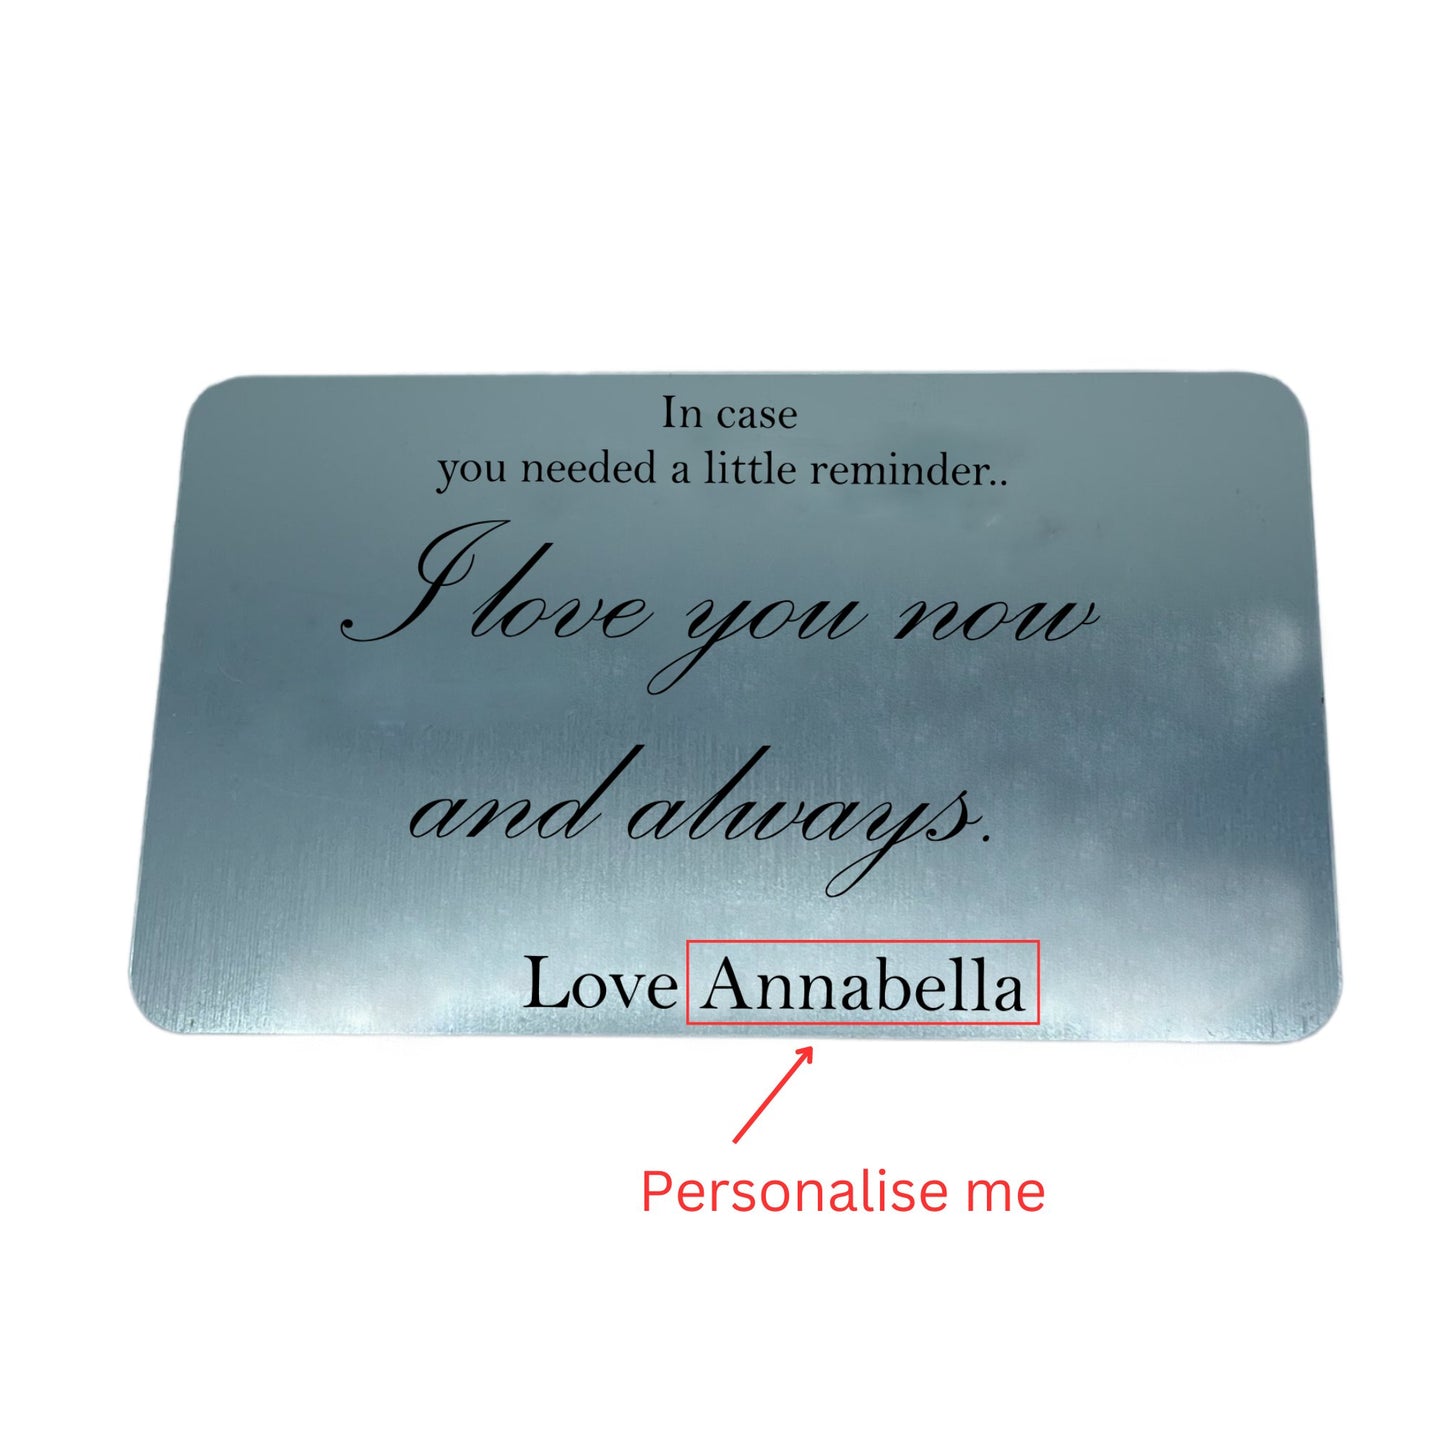 Presenting a charming wallet insert - a flawless gift for couples during Valentine's Day, anniversaries, birthdays, weddings, and more. Tailored to fit wallet credit card slots, this non-metal piece ensures no interference with cards. Featuring a personalized name, it's the ultimate keepsake for any special moment.